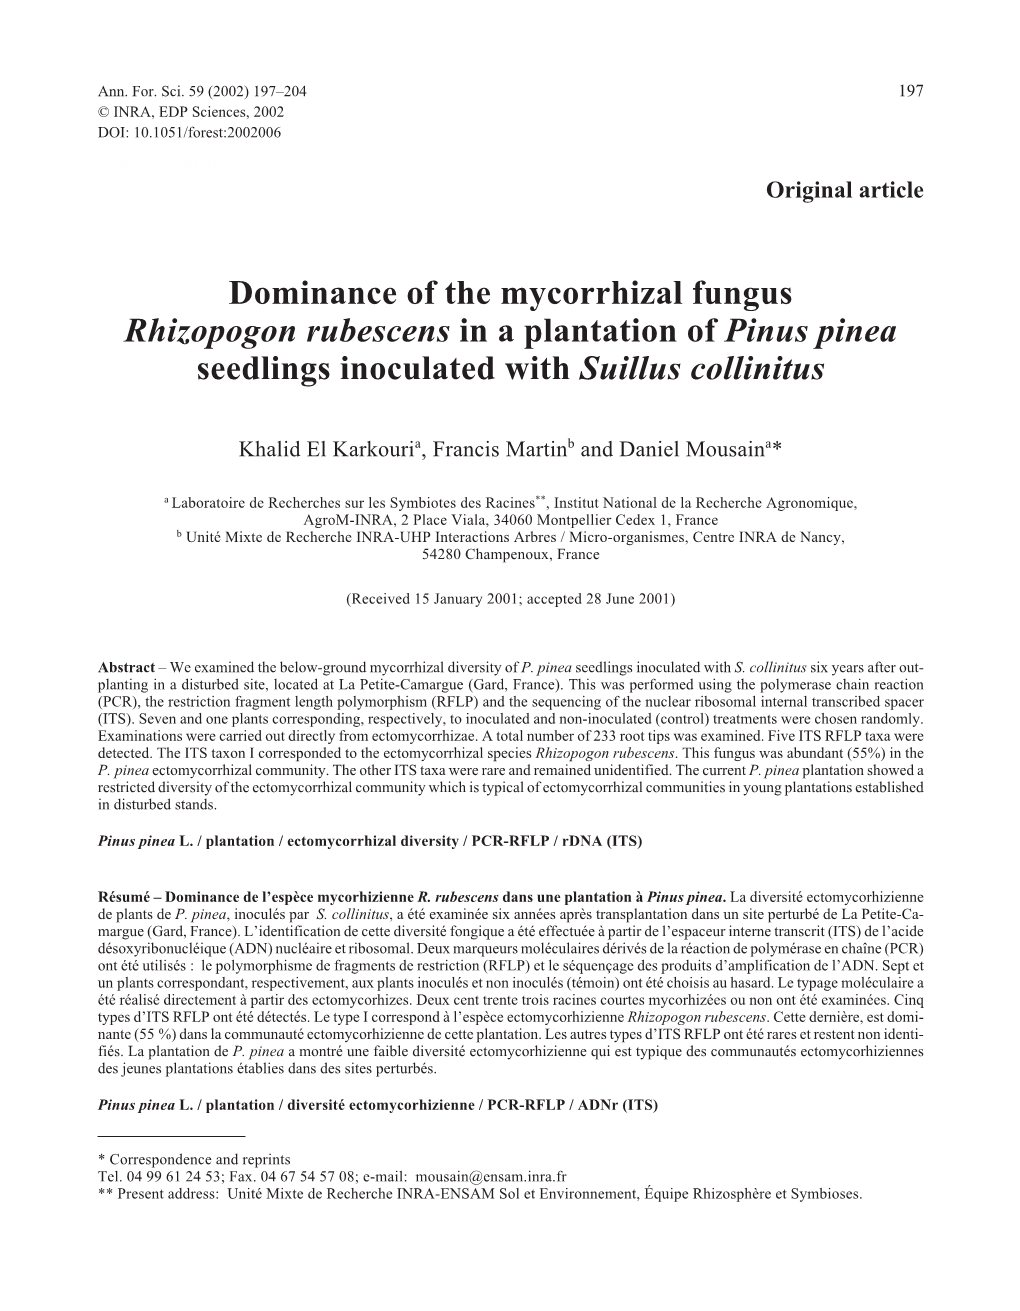 Dominance of the Mycorrhizal Fungus Rhizopogon Rubescens in a Plantation of Pinus Pinea Seedlings Inoculated with Suillus Collinitus